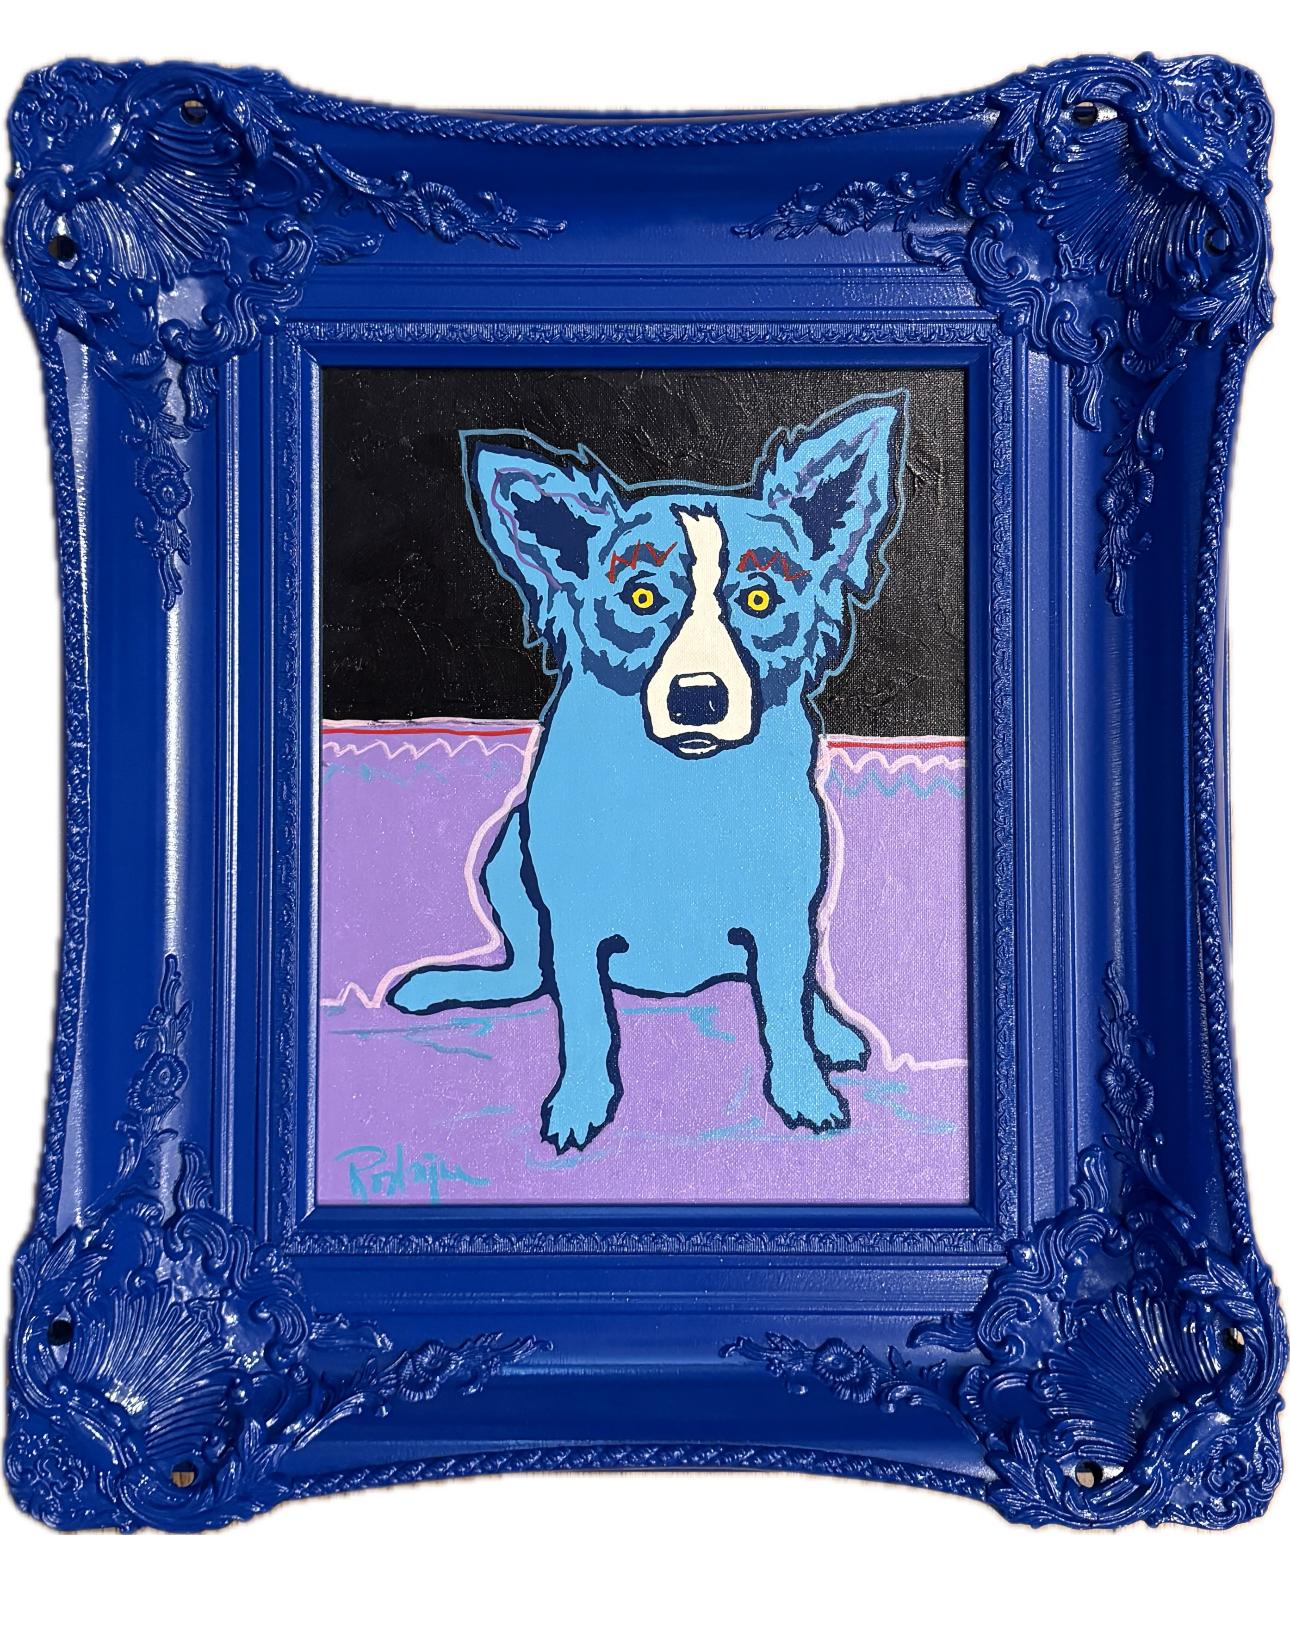 Black on My Back - Mixed Media Art by George Rodrigue